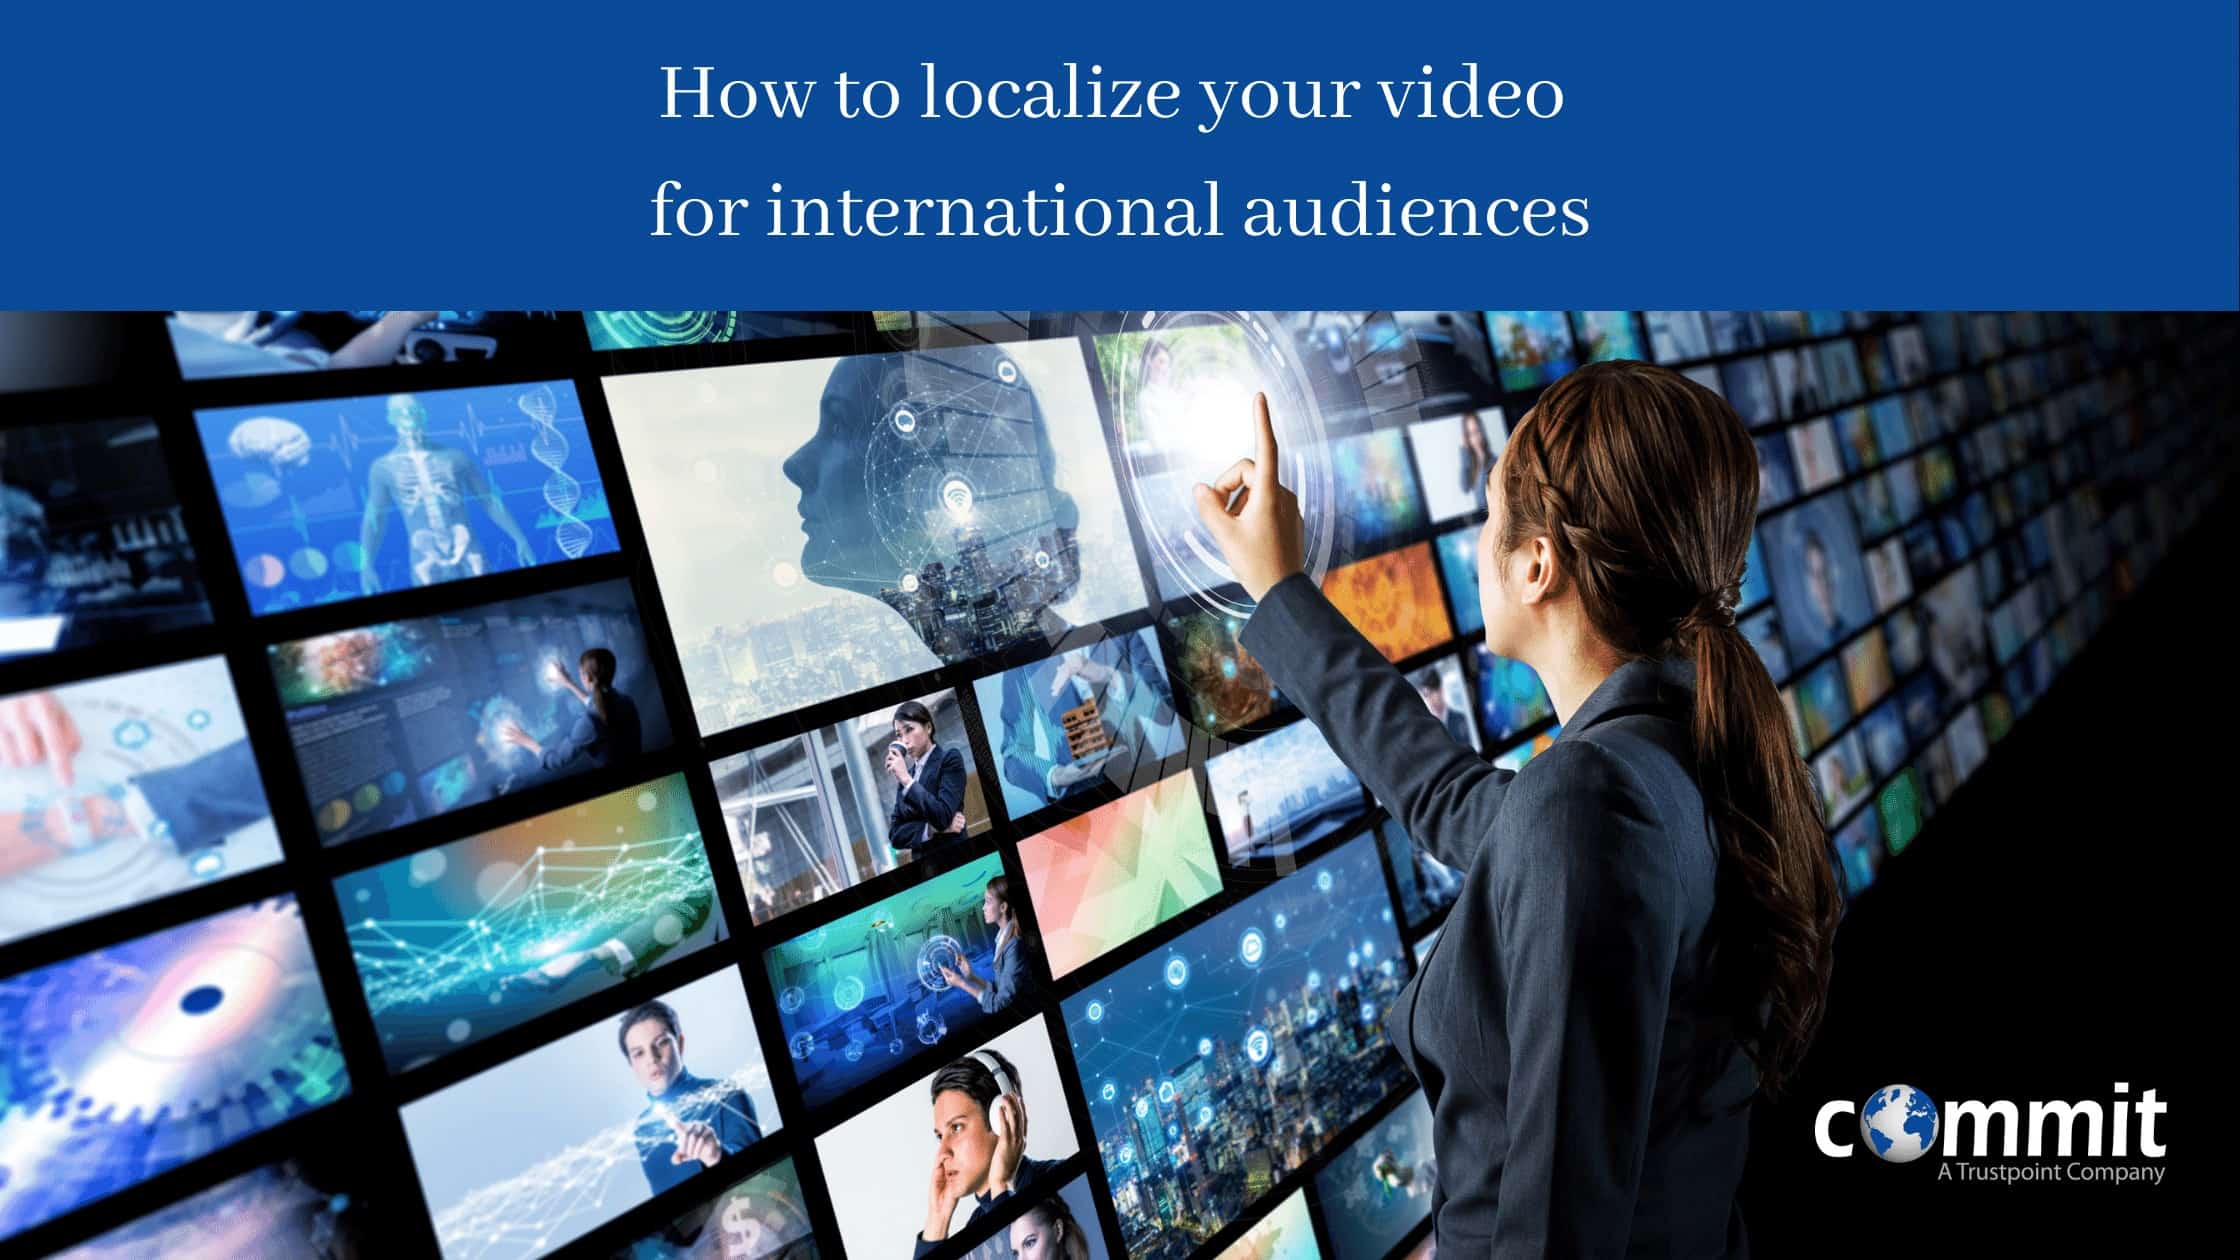 How to localize your video for international audiences